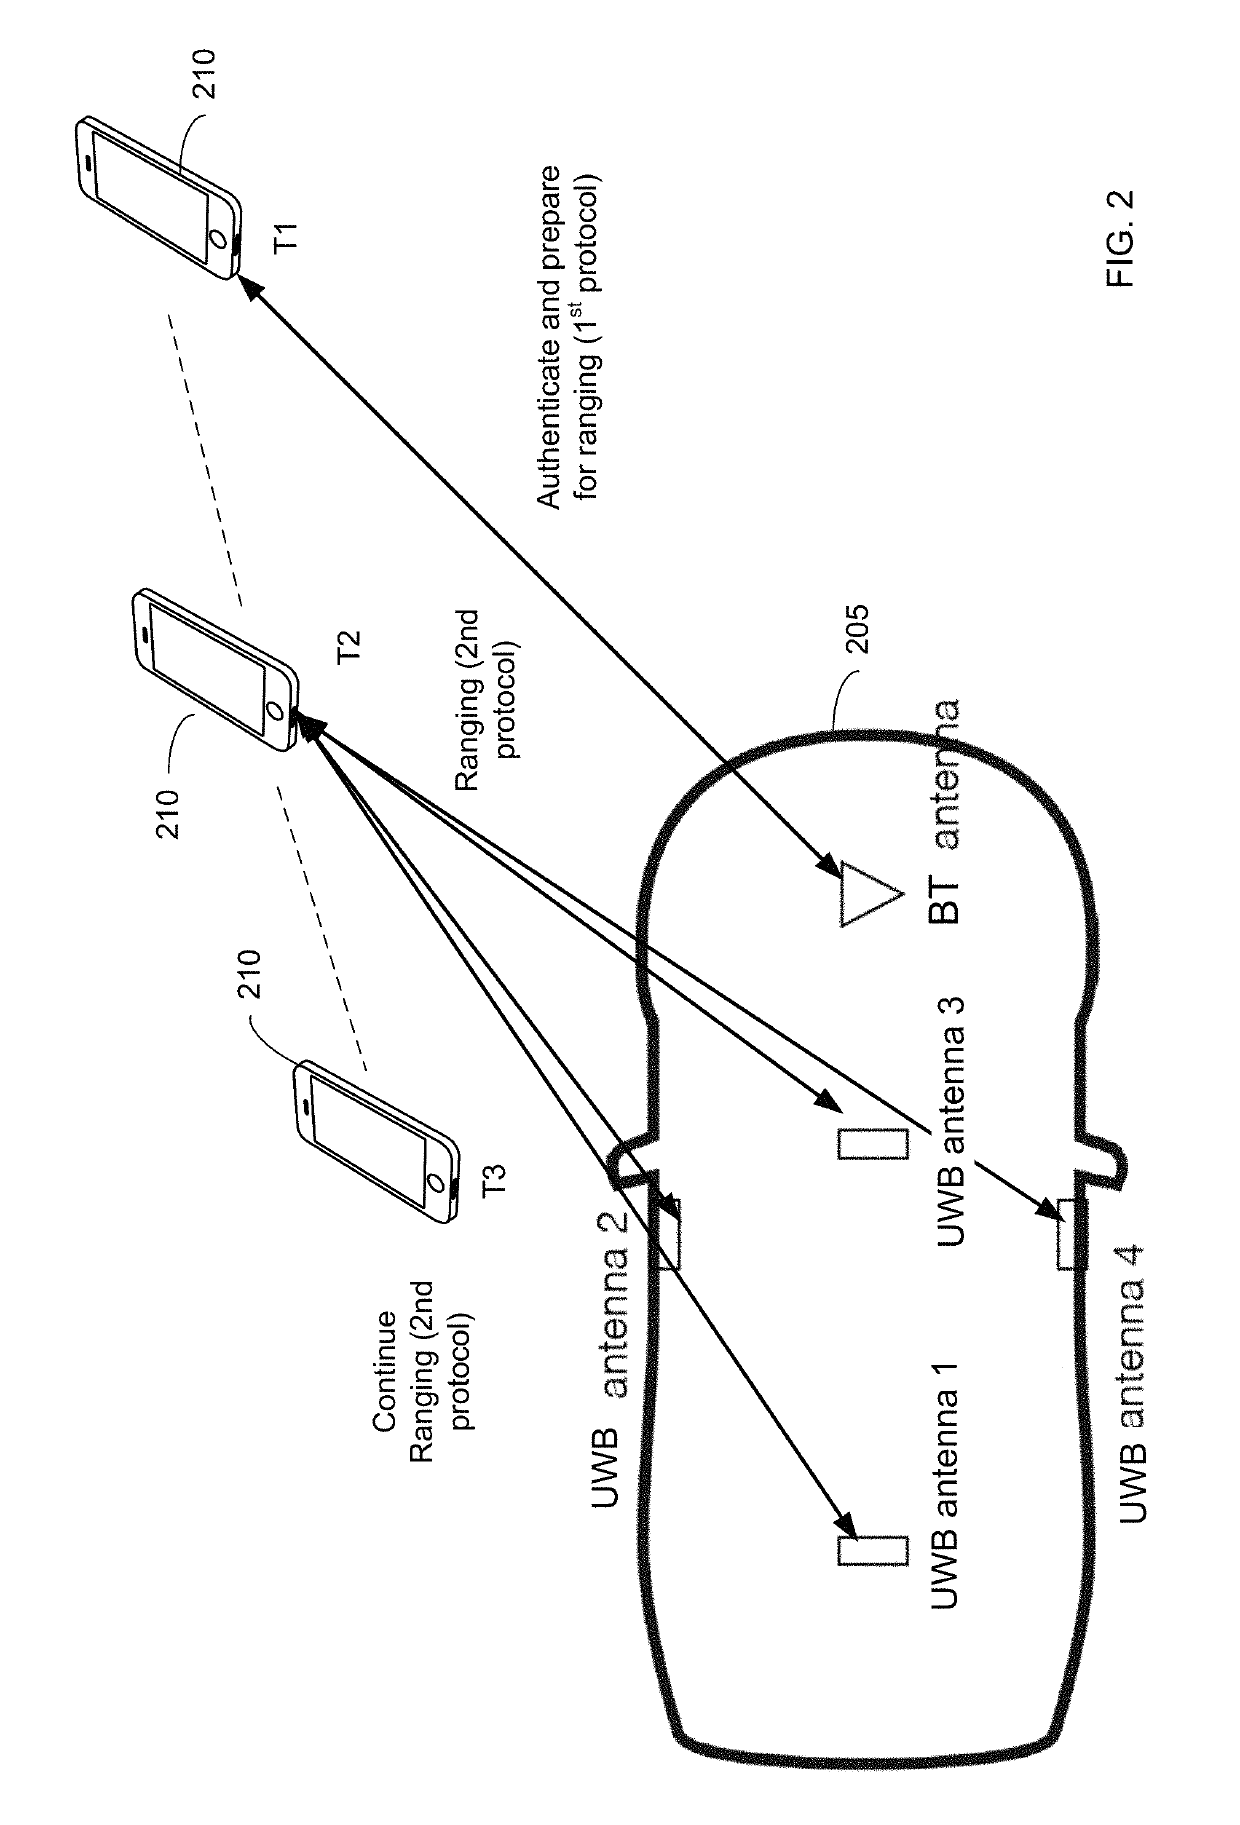 Mobile device for communicating and ranging with access control system for automatic functionality